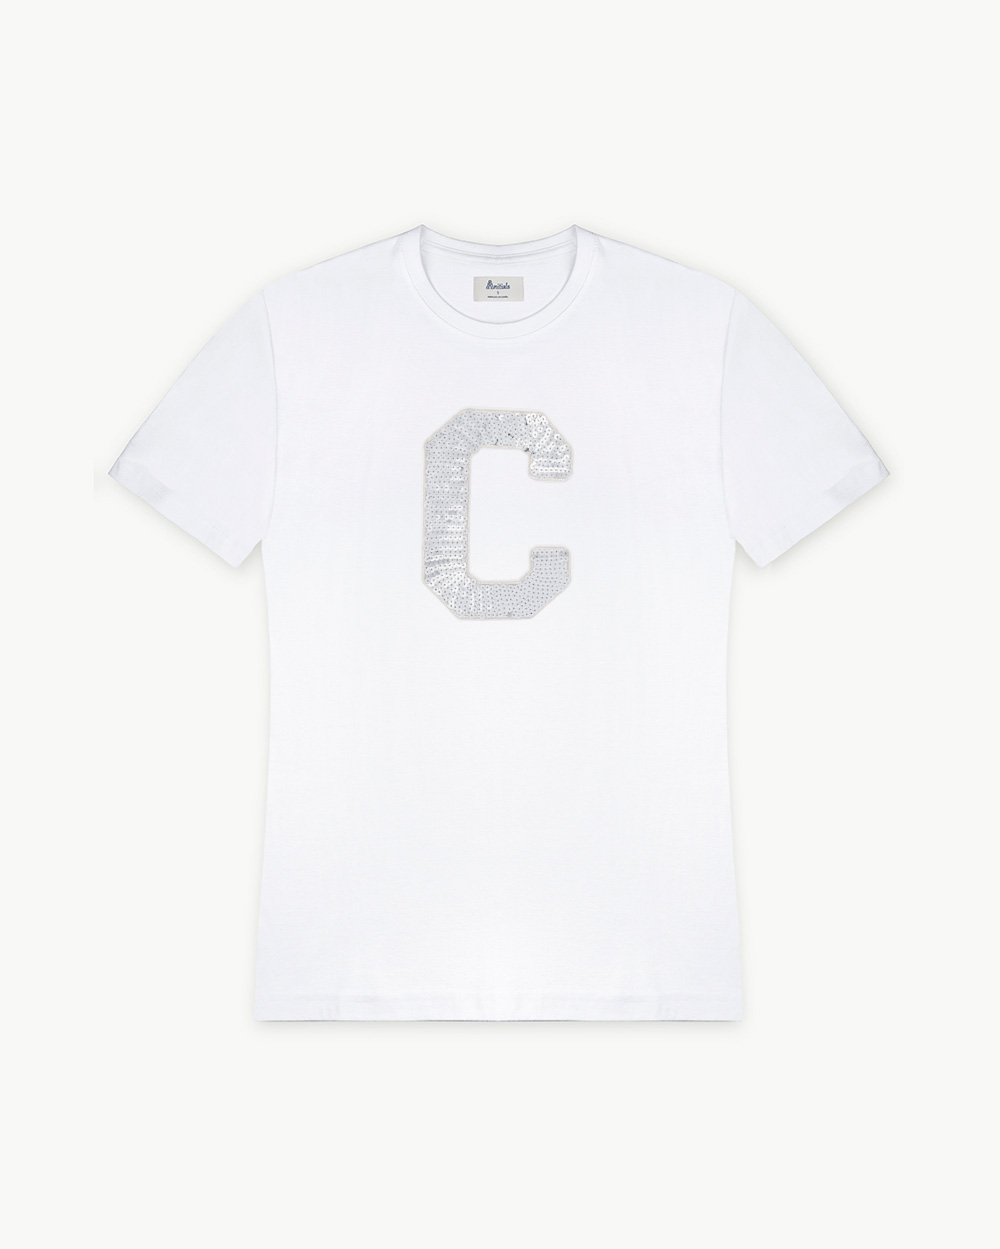 WHITE T-SHIRT | INITIAL SILVER SEQUINS